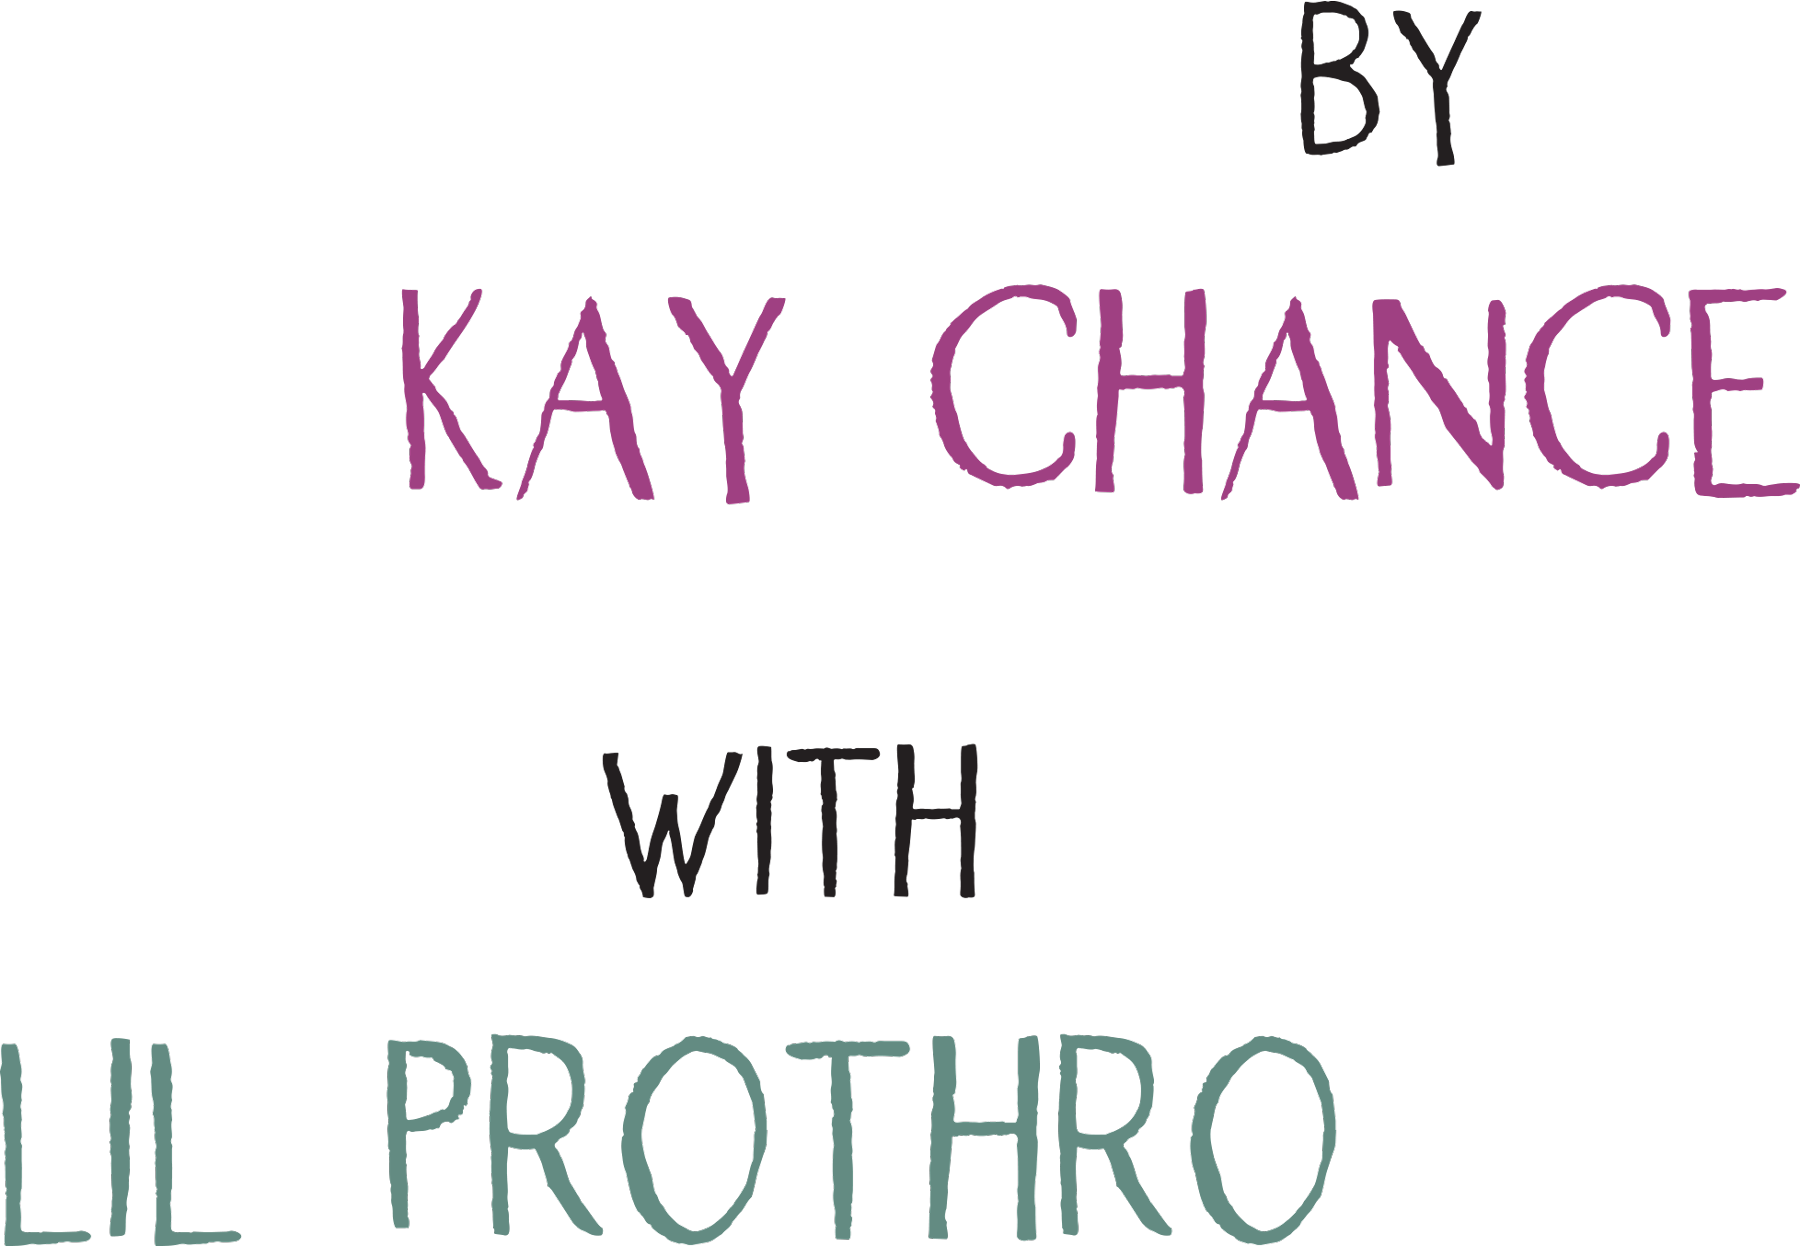 By Kay Chance with Lil Prothro